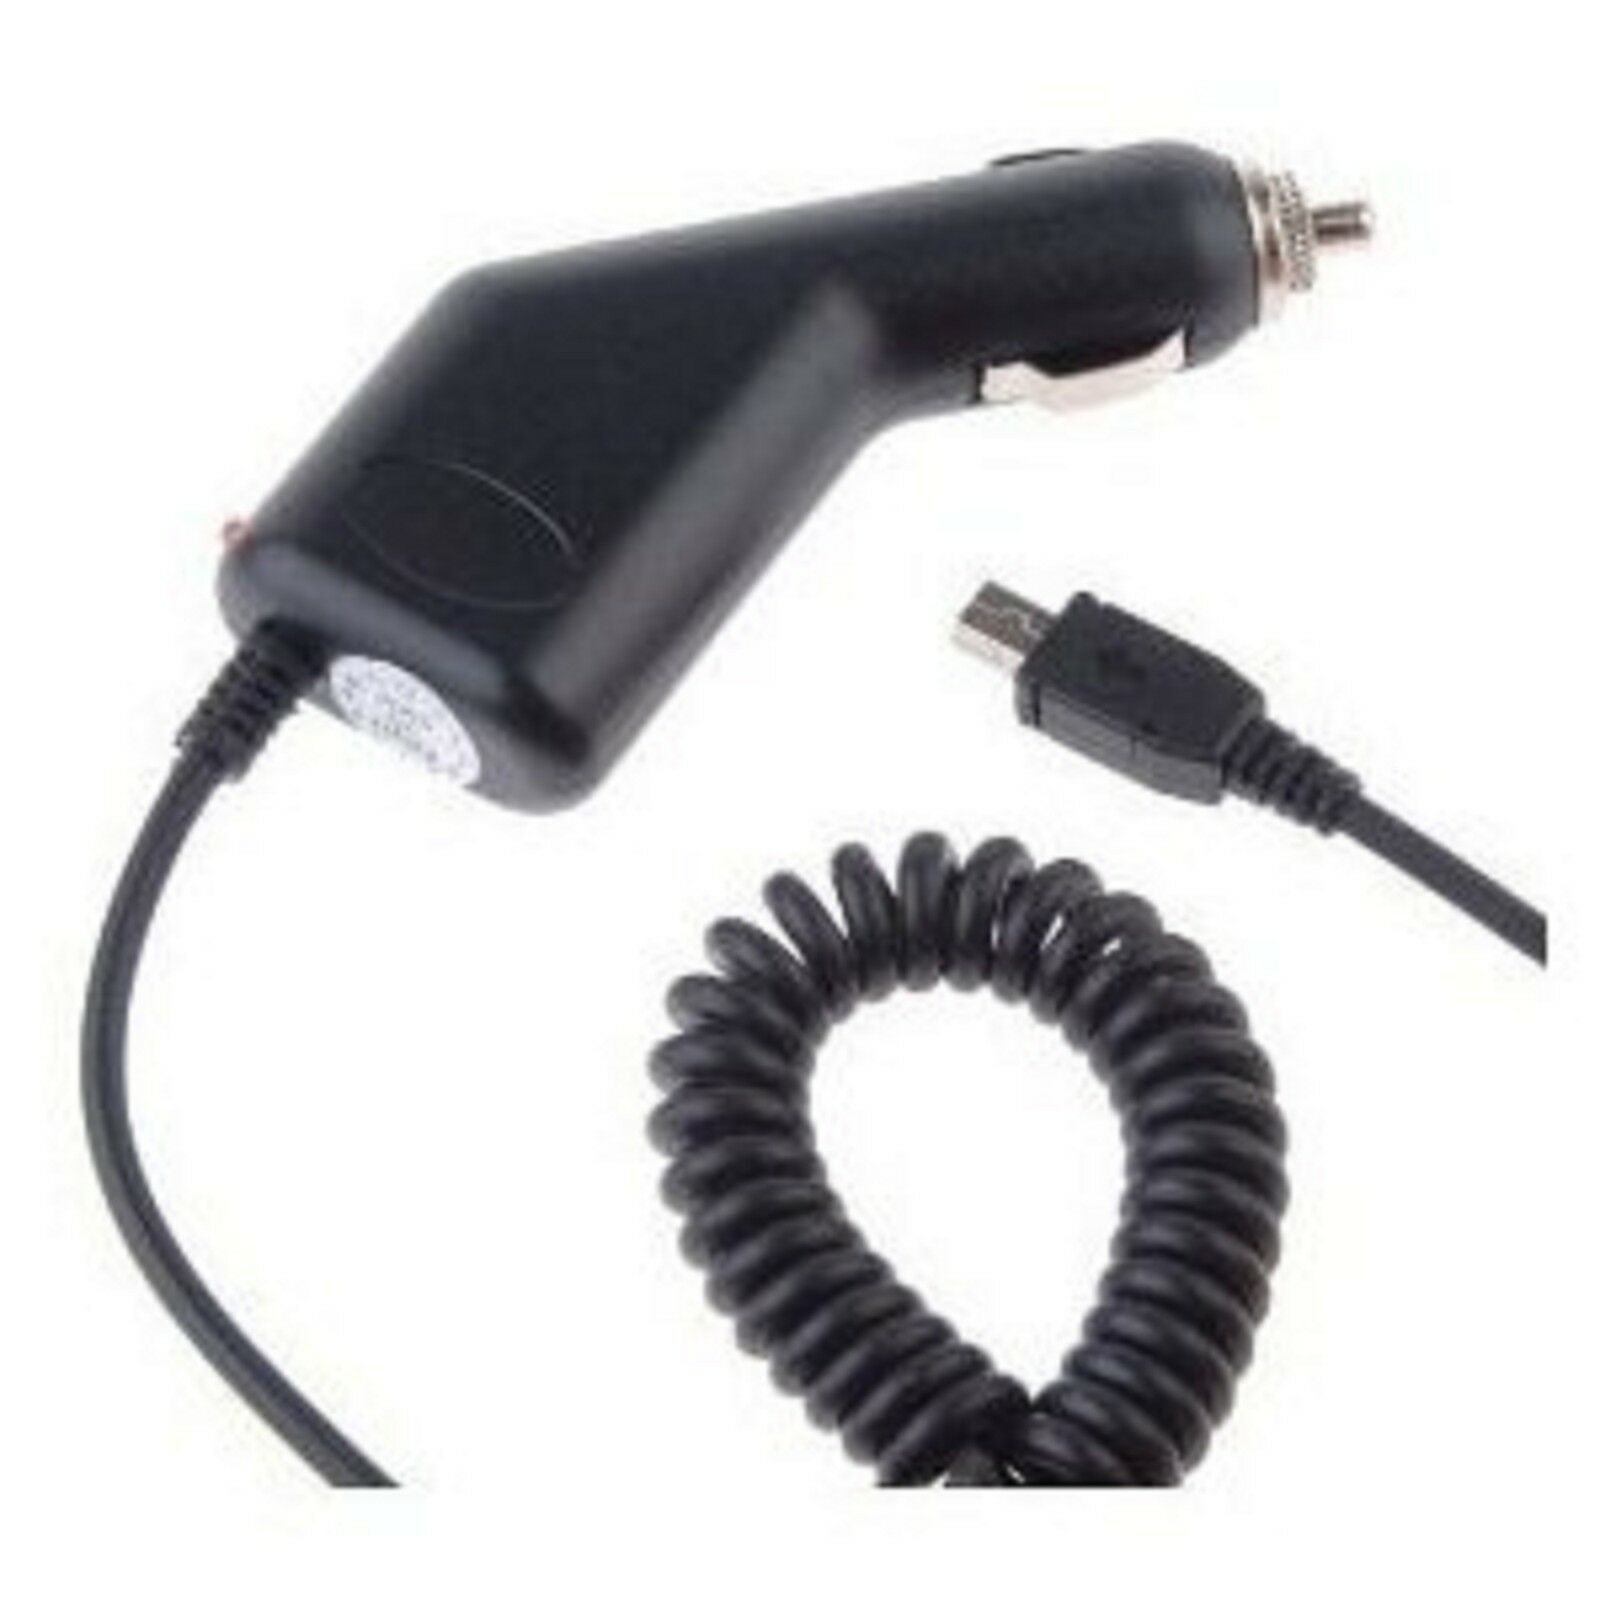 Car Charger For Magellan Roadmate 1424 1425 1430 1440 1470 Power Lead Cable